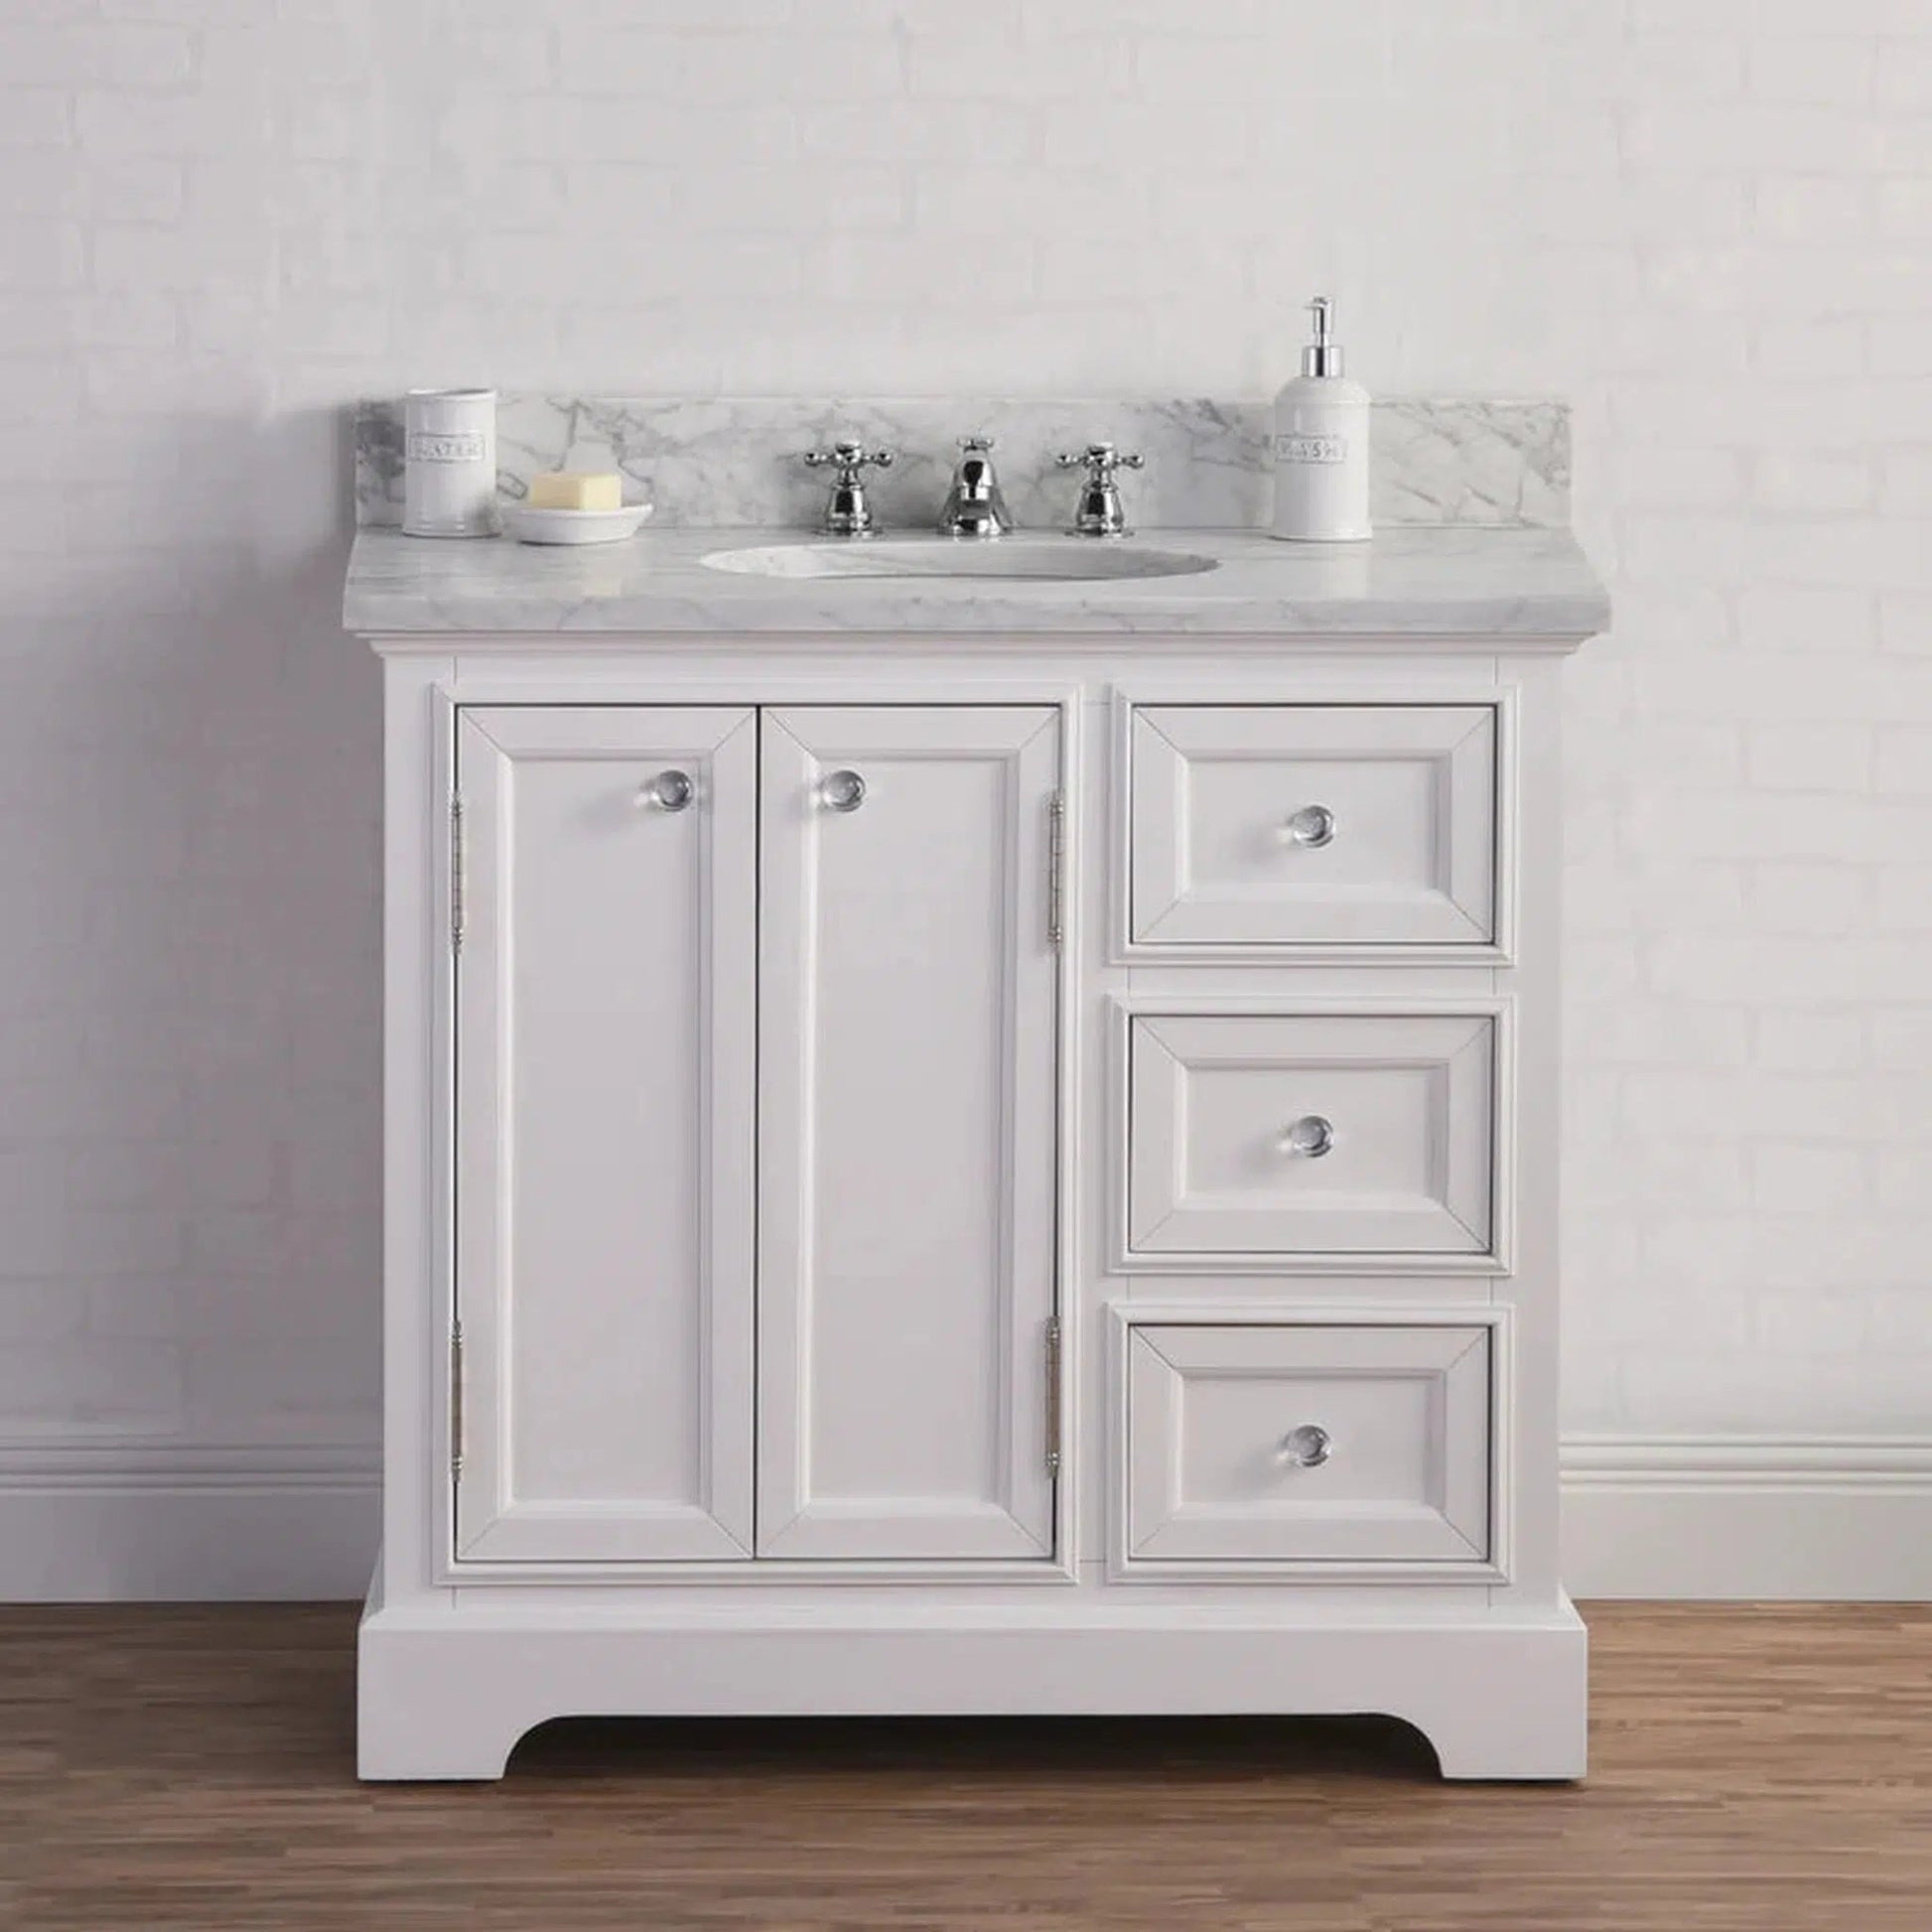 Water Creation 36 Inch Wide Pure White Single Sink Carrara Marble Bathroom Vanity With Matching Mirror And Faucet(s) From The Derby Collection